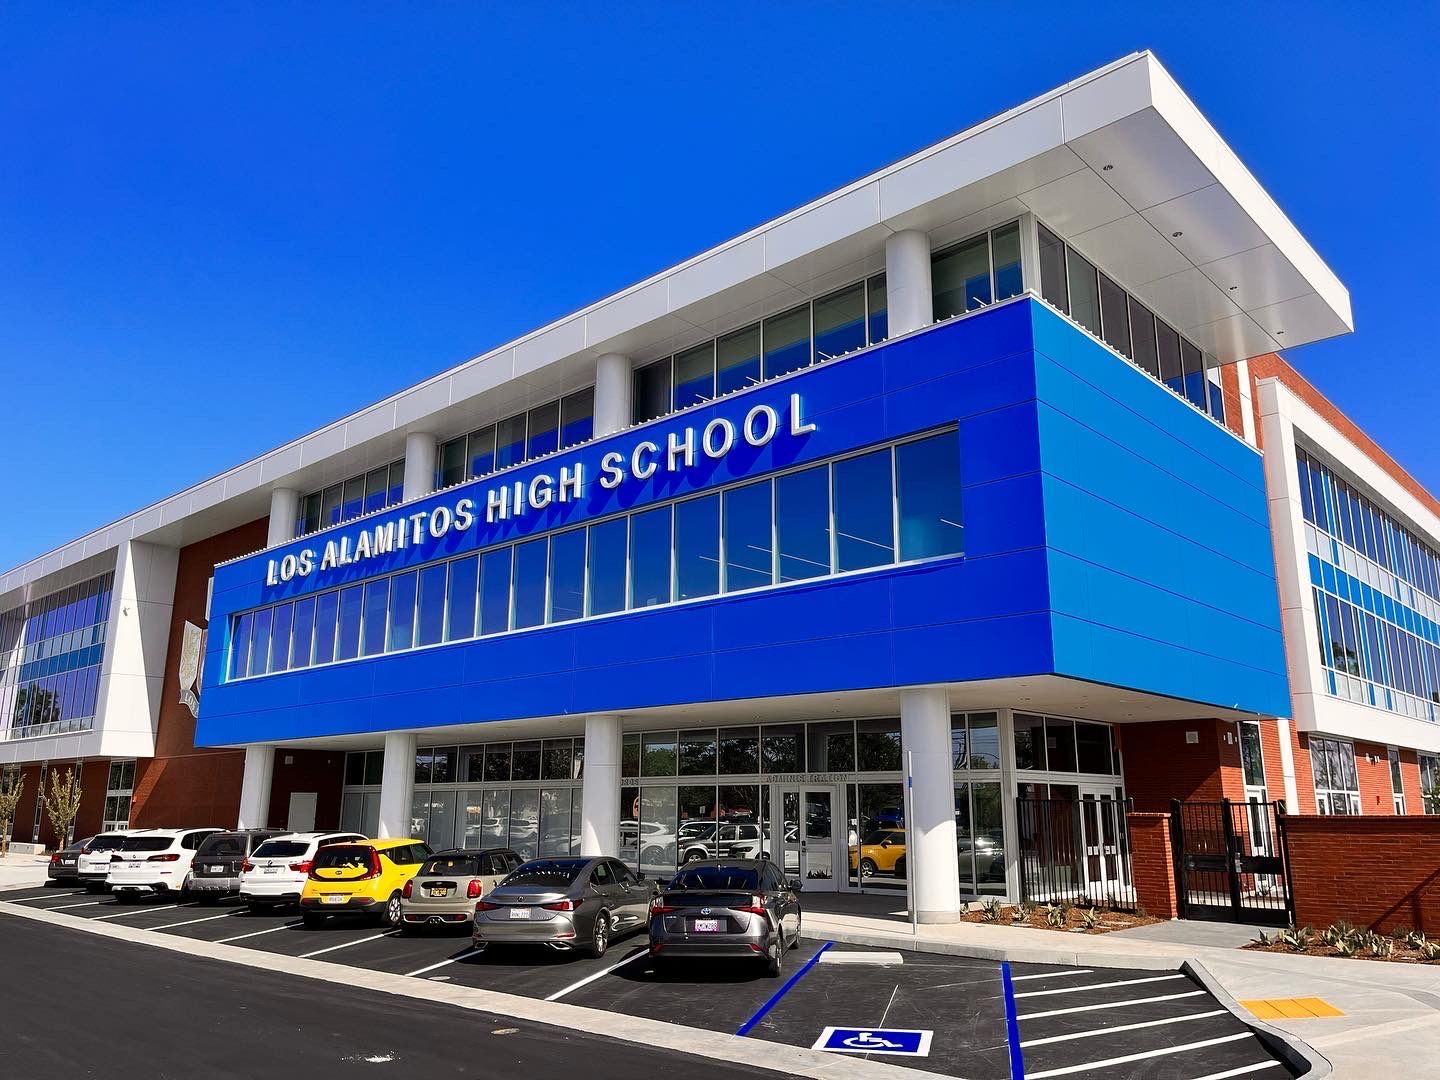 The front of the new STEM building at Los Alamitos High School photographed on August 15. Photo by Jeannette Andruss.